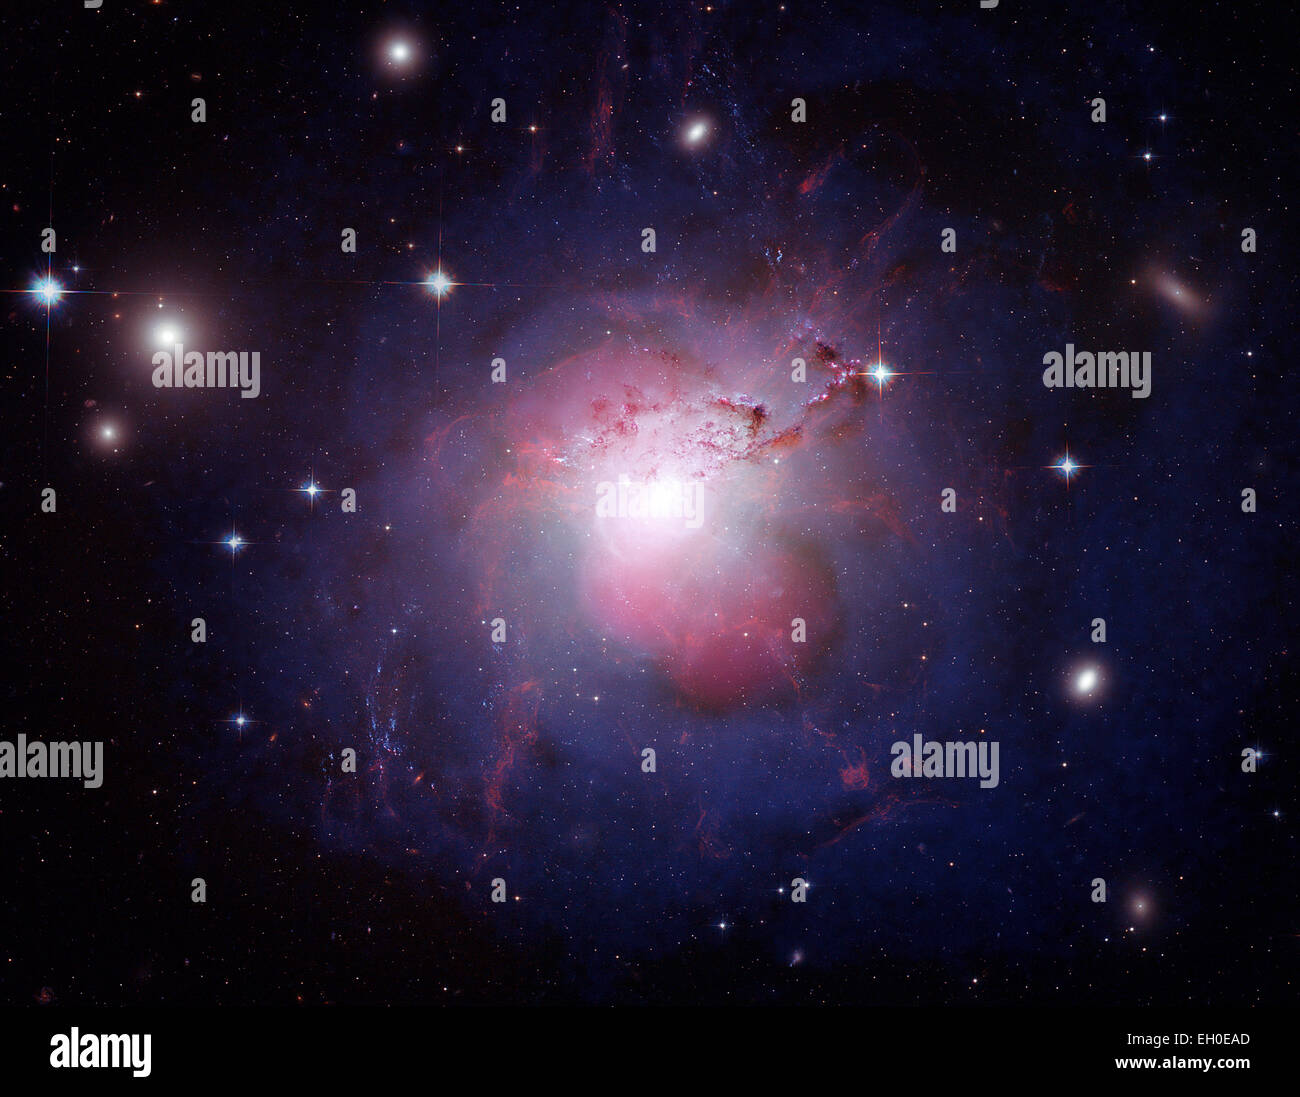 A Monster Galaxy in Perseus Cluster The active galaxy NGC 1275 lies at the center of the cluster of galaxies known as the Perseus Cluster. By combining multi-wavelength images into a single composite, the dynamics of the galaxy are more easily visible. In this composite image, X-rays from Chandra are shown in violet and reveal the presence of a black hole at the center of NGC 1275. Optical data from Hubble is depicted in red, green, and blue, and radio emission in pink traces the jets generated from the central black hole. Stock Photo